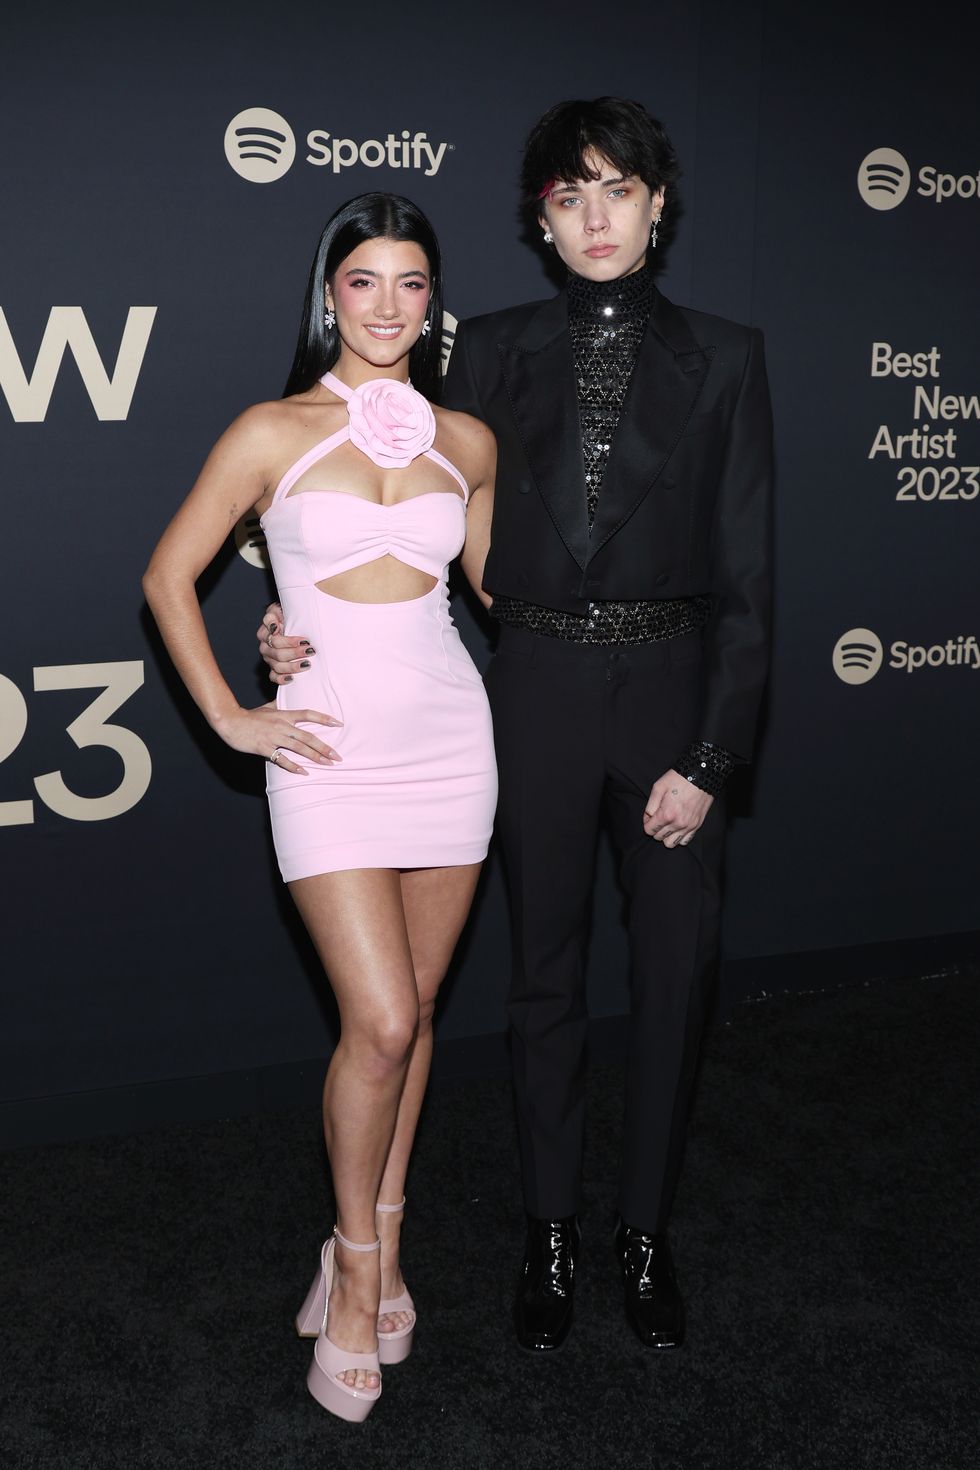 west hollywood, california february 02 l r charli damelio and landon barker attend the 2023 spotify best new artist party at pacific design center on february 02, 2023 in west hollywood, california photo by steven simionefilmmagic